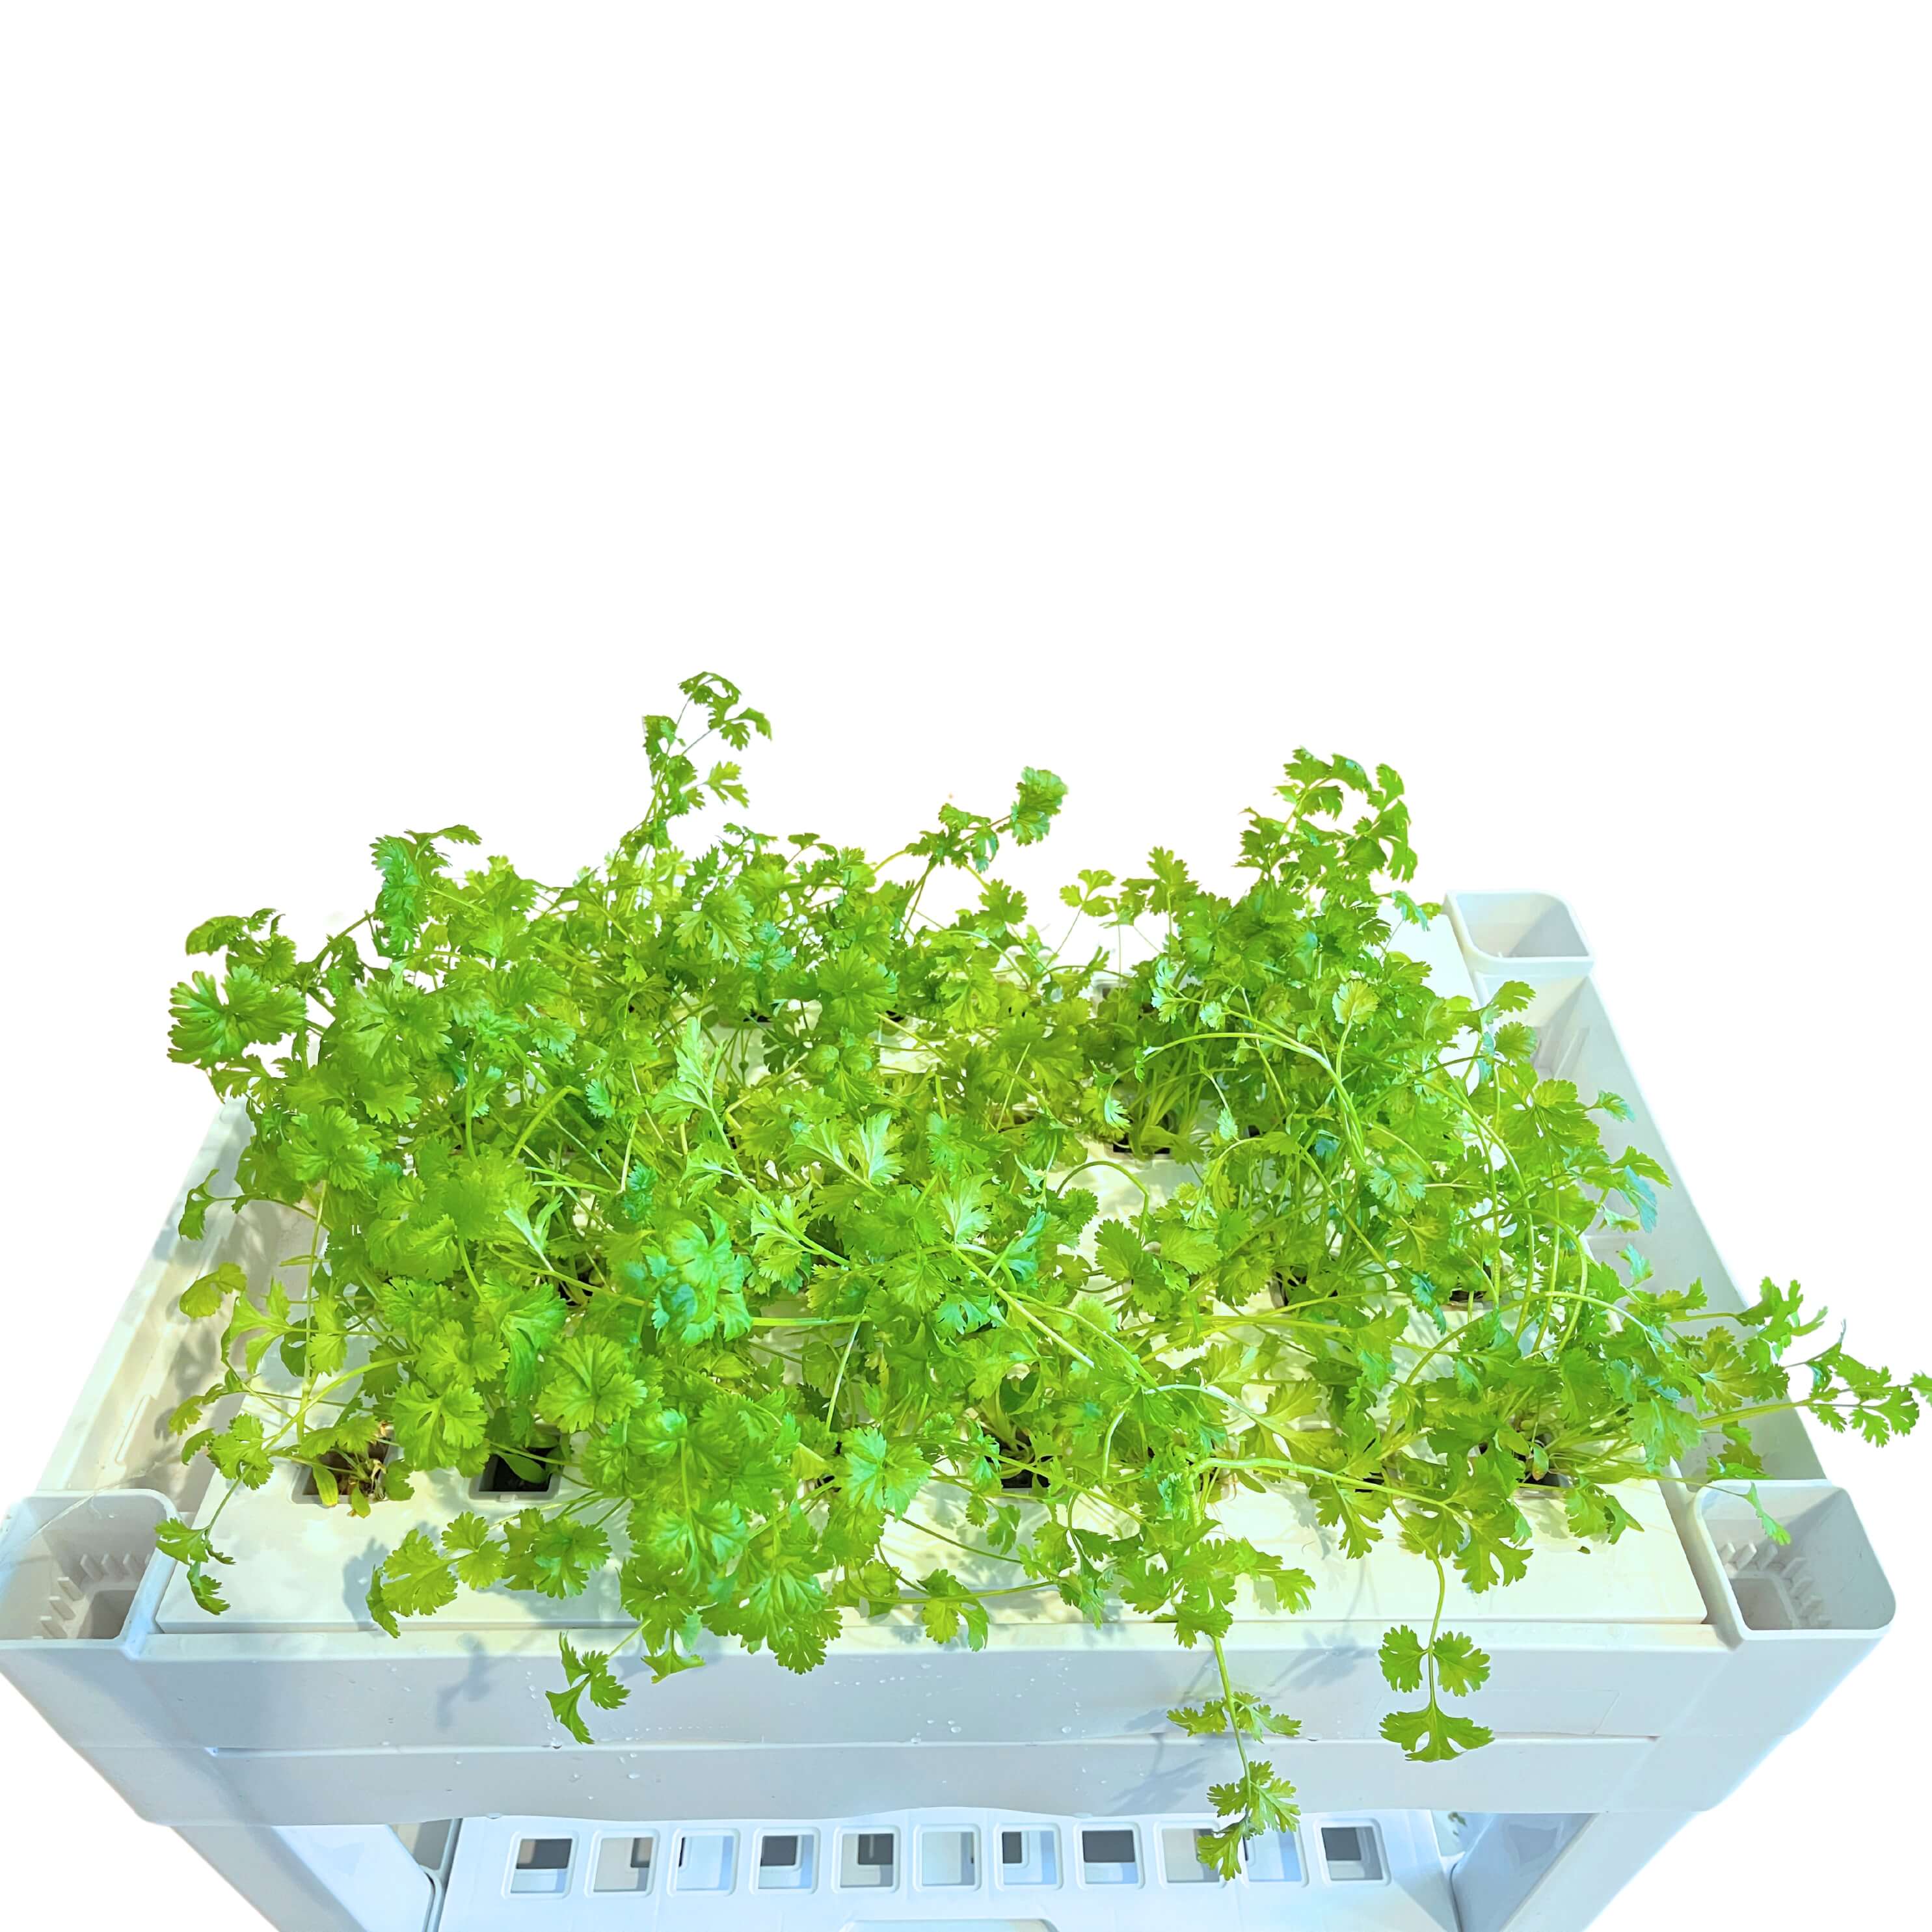 Coriander(32x - Subscription Only)